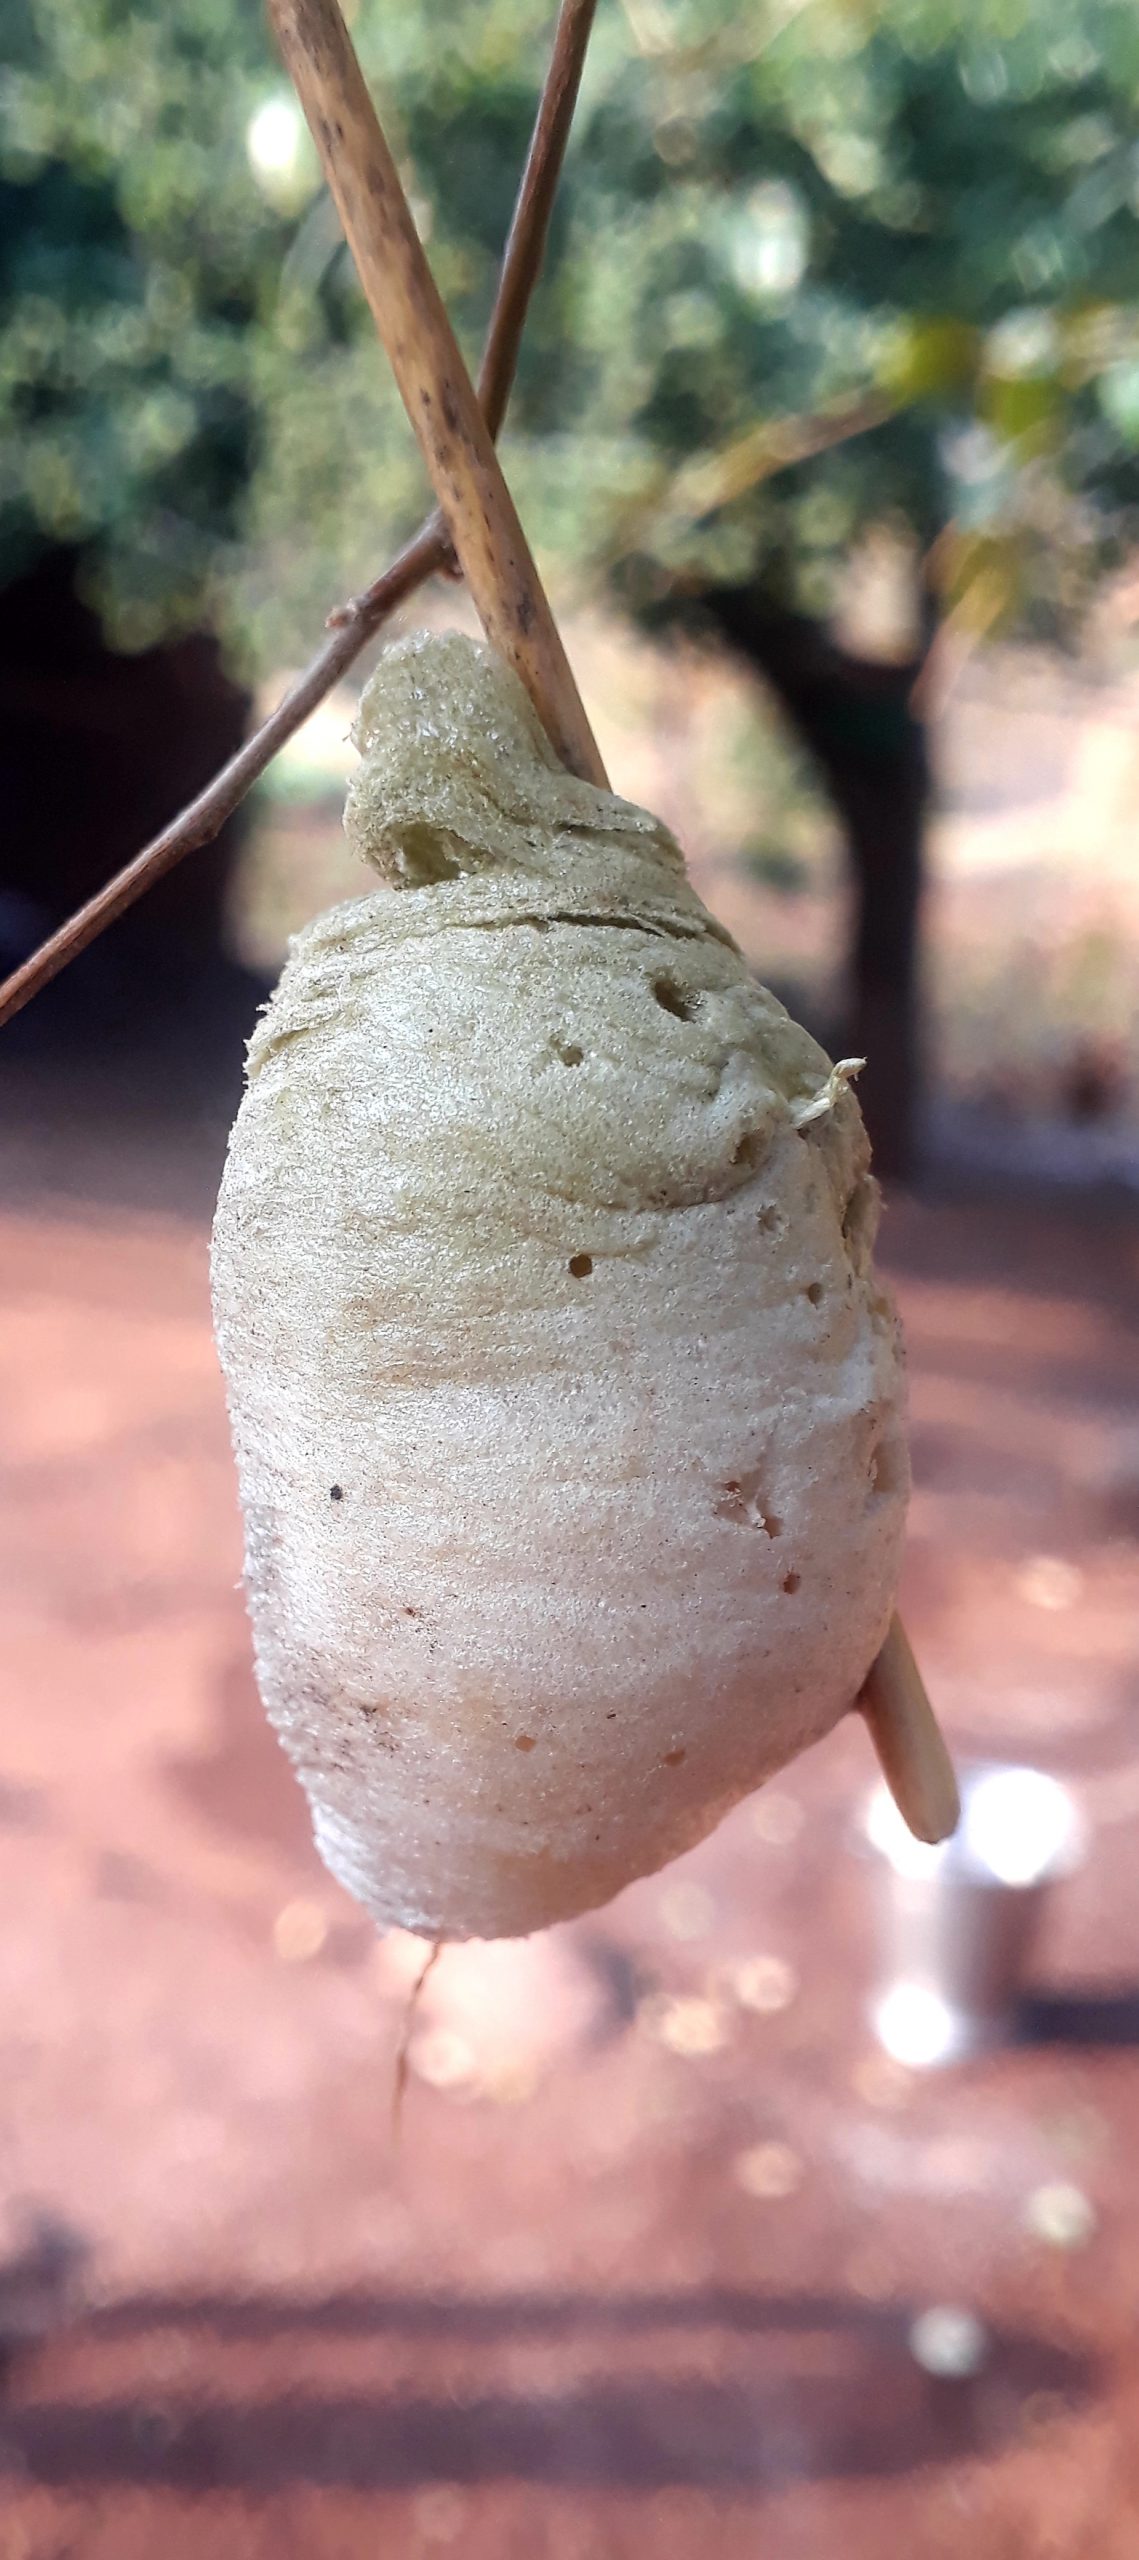 A cocoon